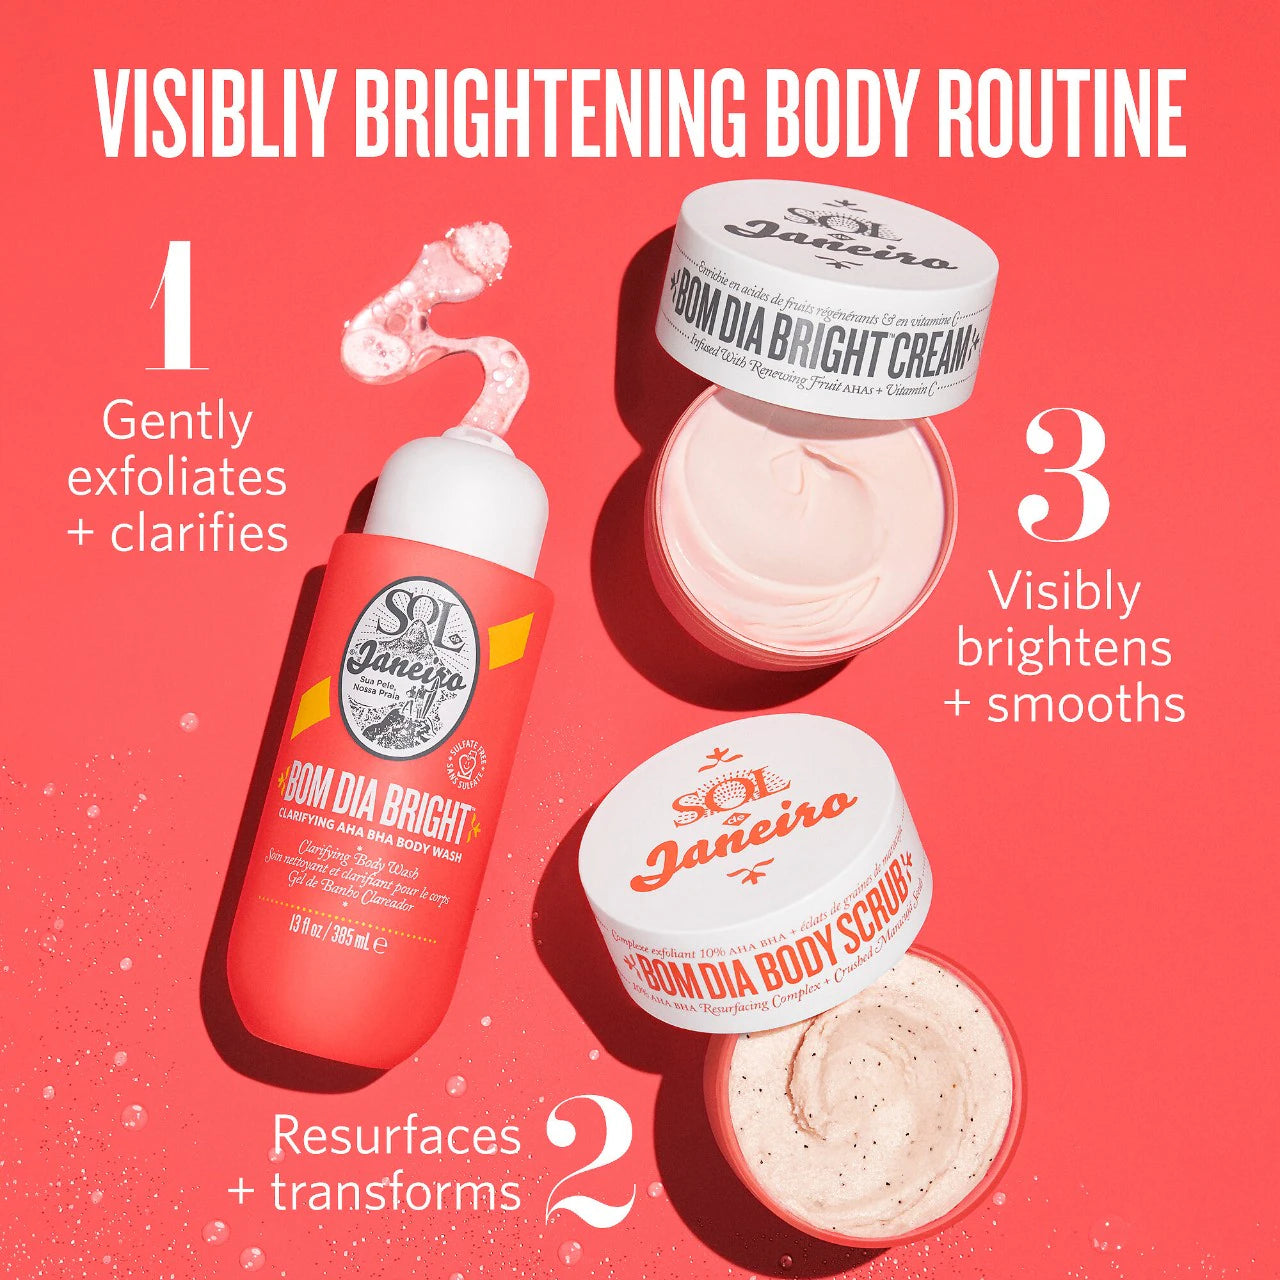 Bom Dia Bright Visibly Brightening and Smoothing Body Cream with Vitamin C